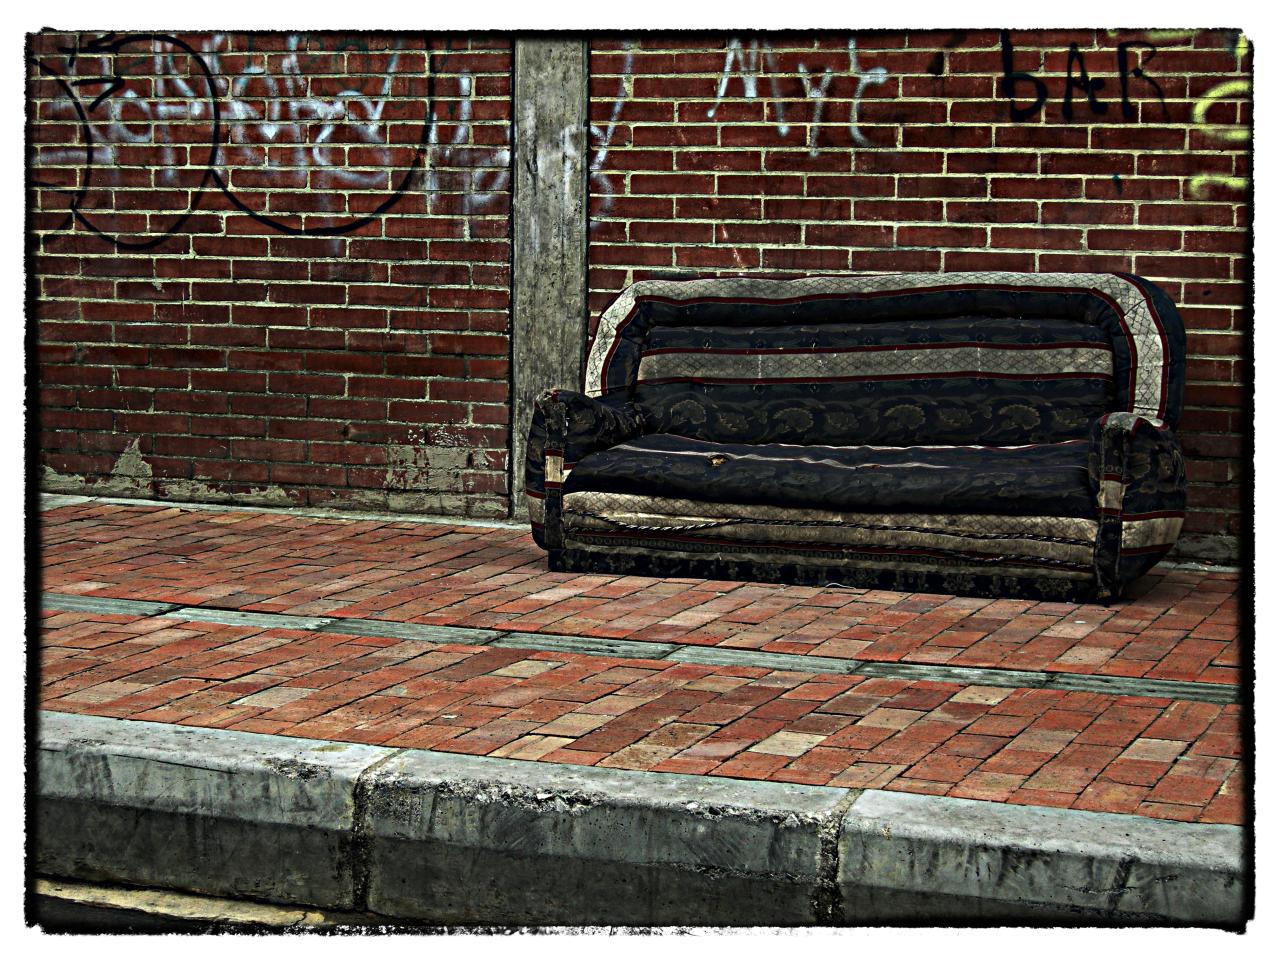 a bench on the sidewalk with graffiti writing behind it